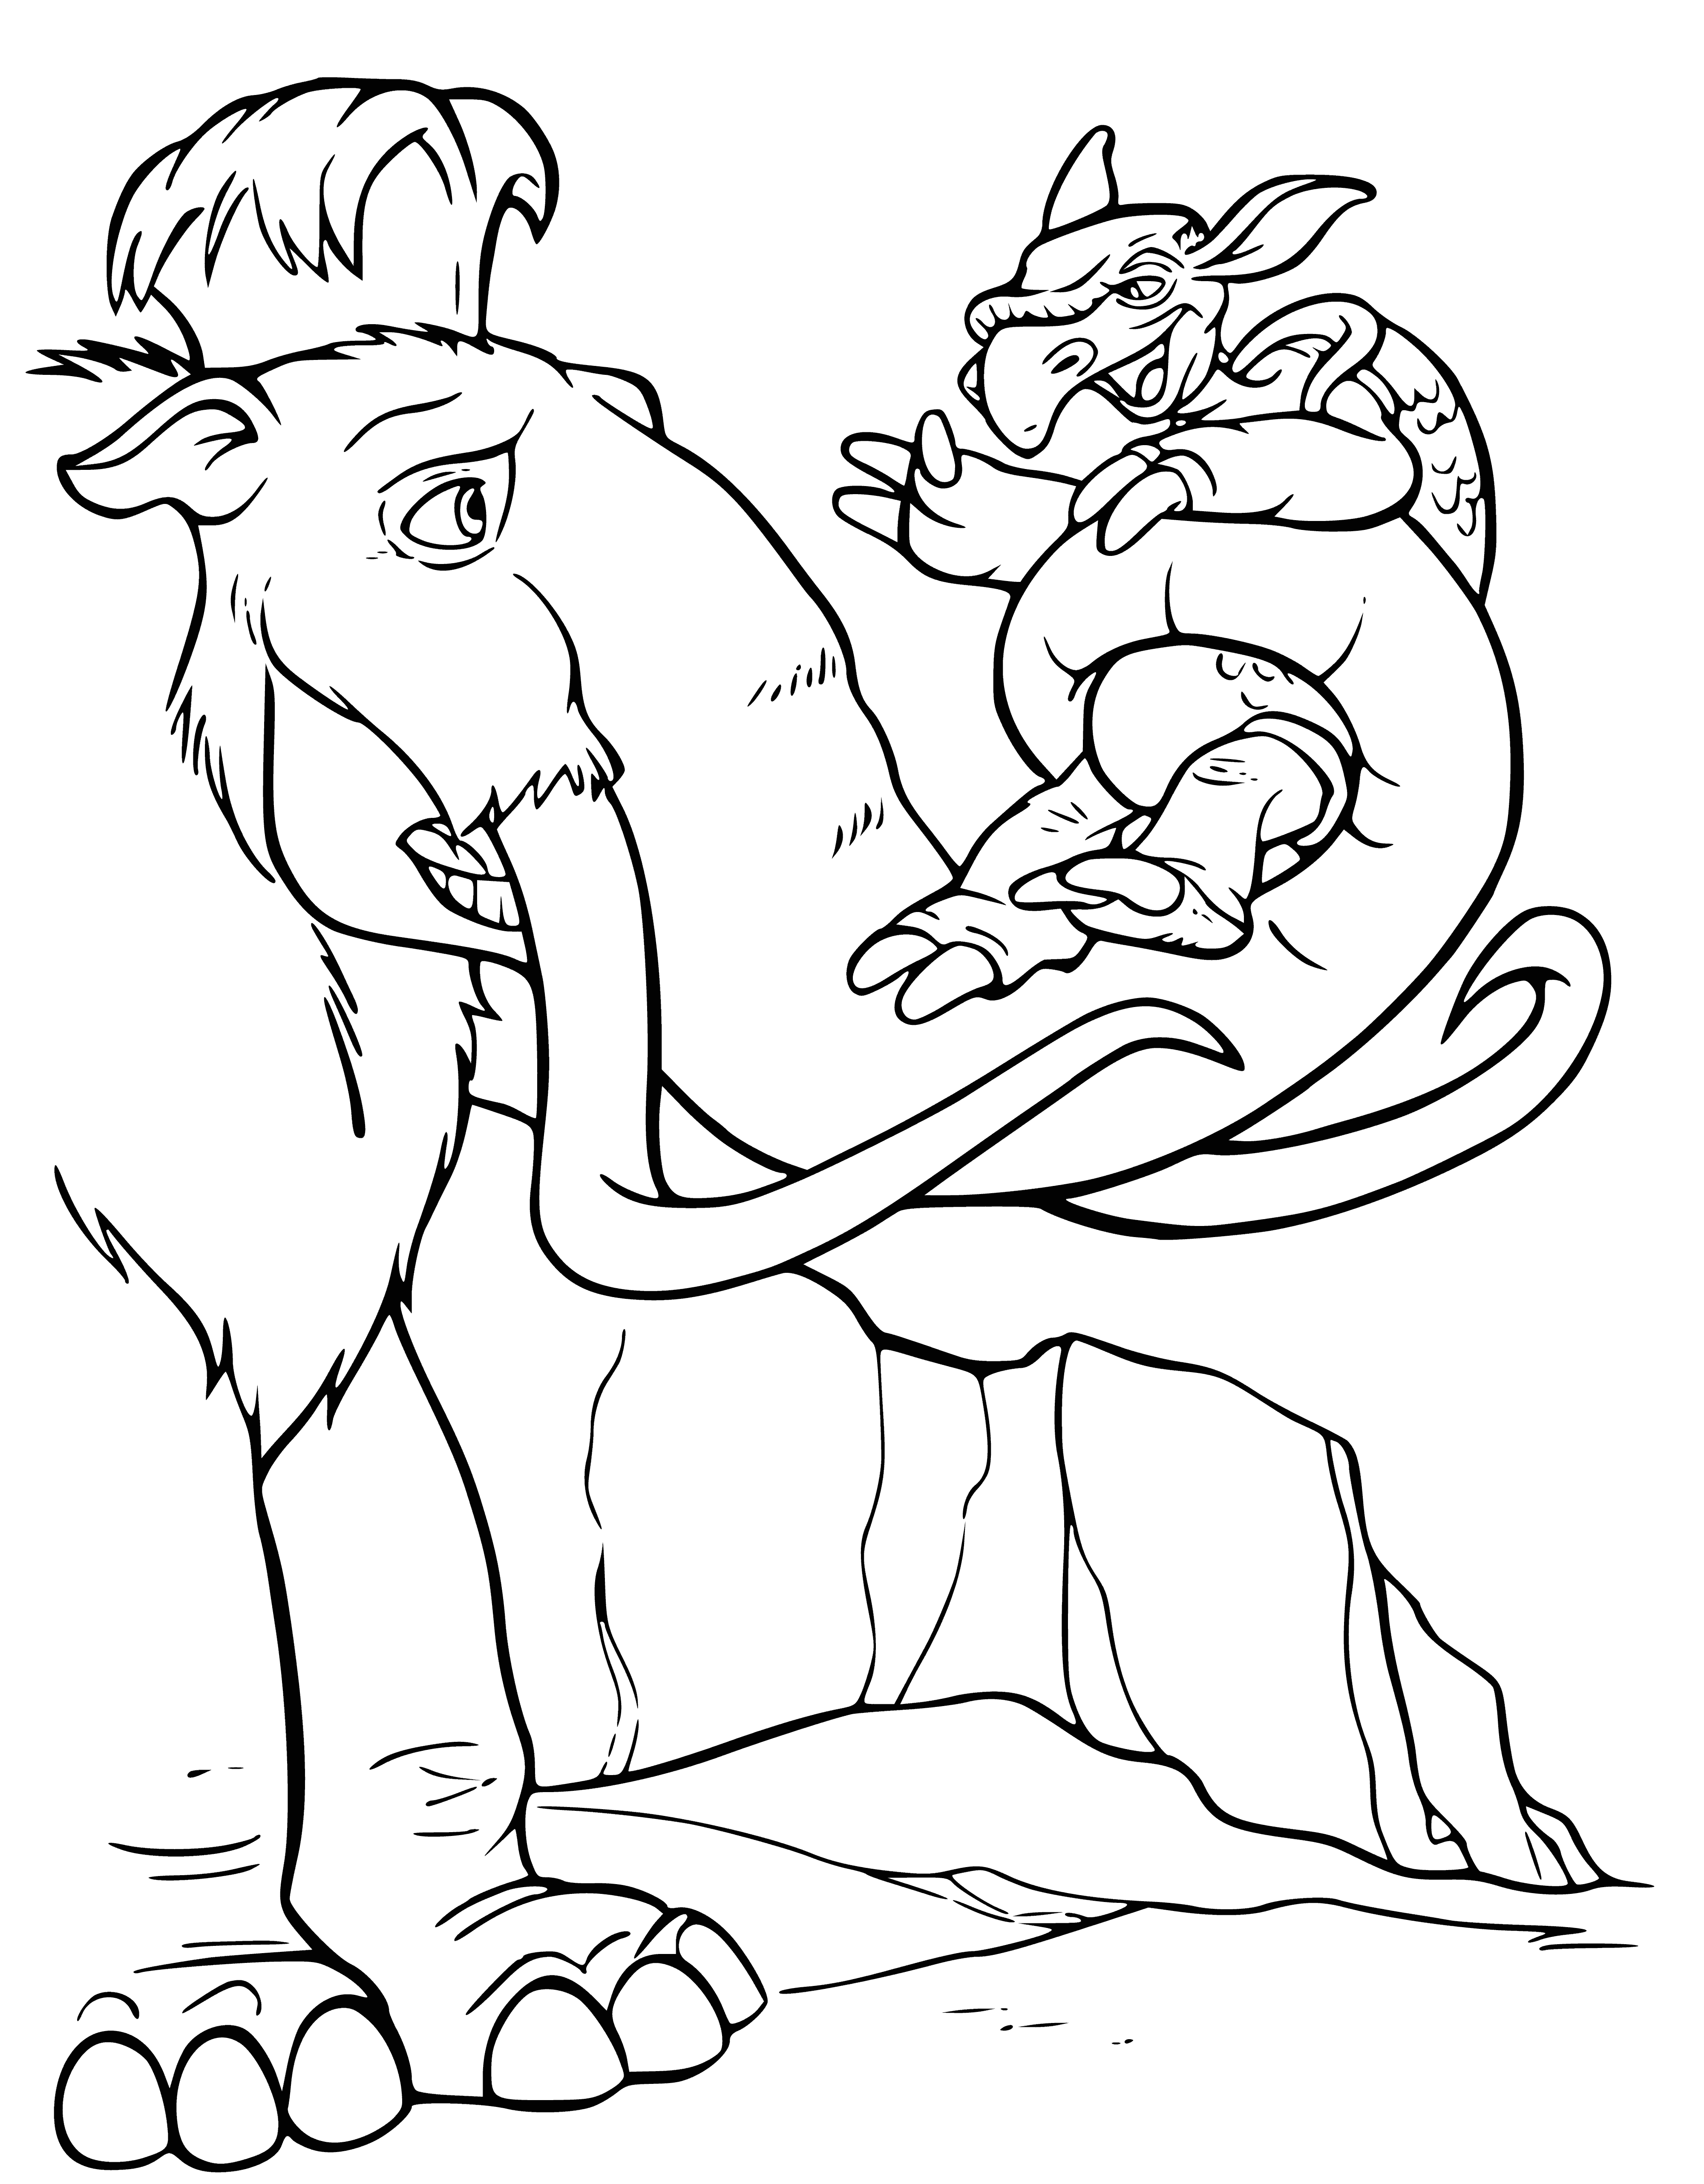 coloring page: Manny, a mammoth, holds a turtle struggling to escape in his trunk while walking on a frozen pond.